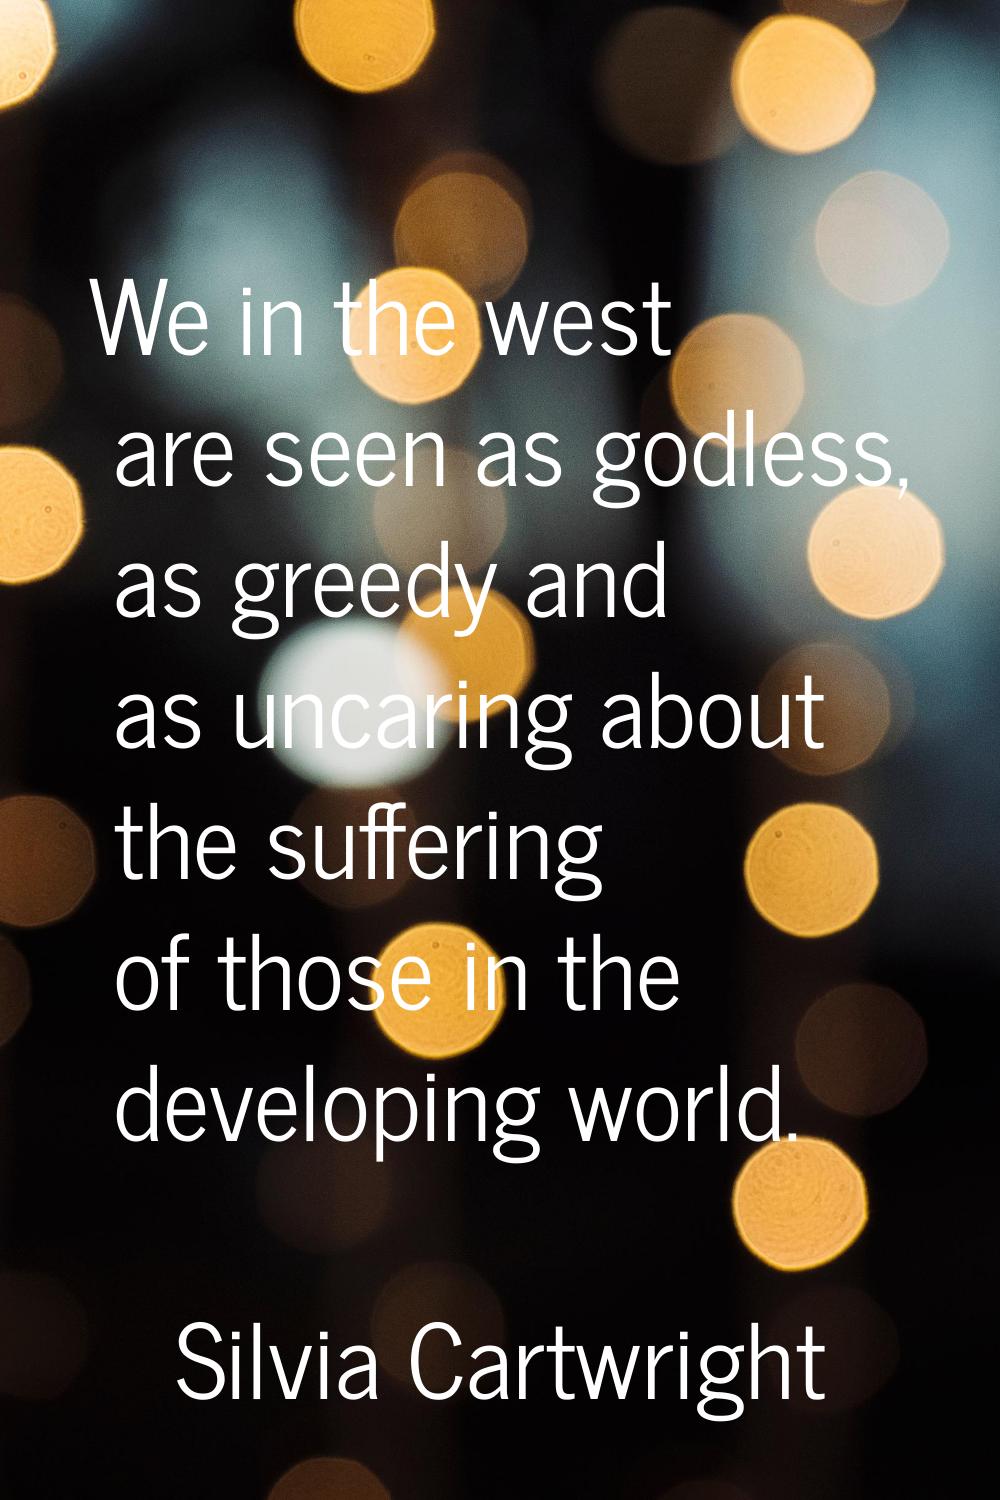 We in the west are seen as godless, as greedy and as uncaring about the suffering of those in the d